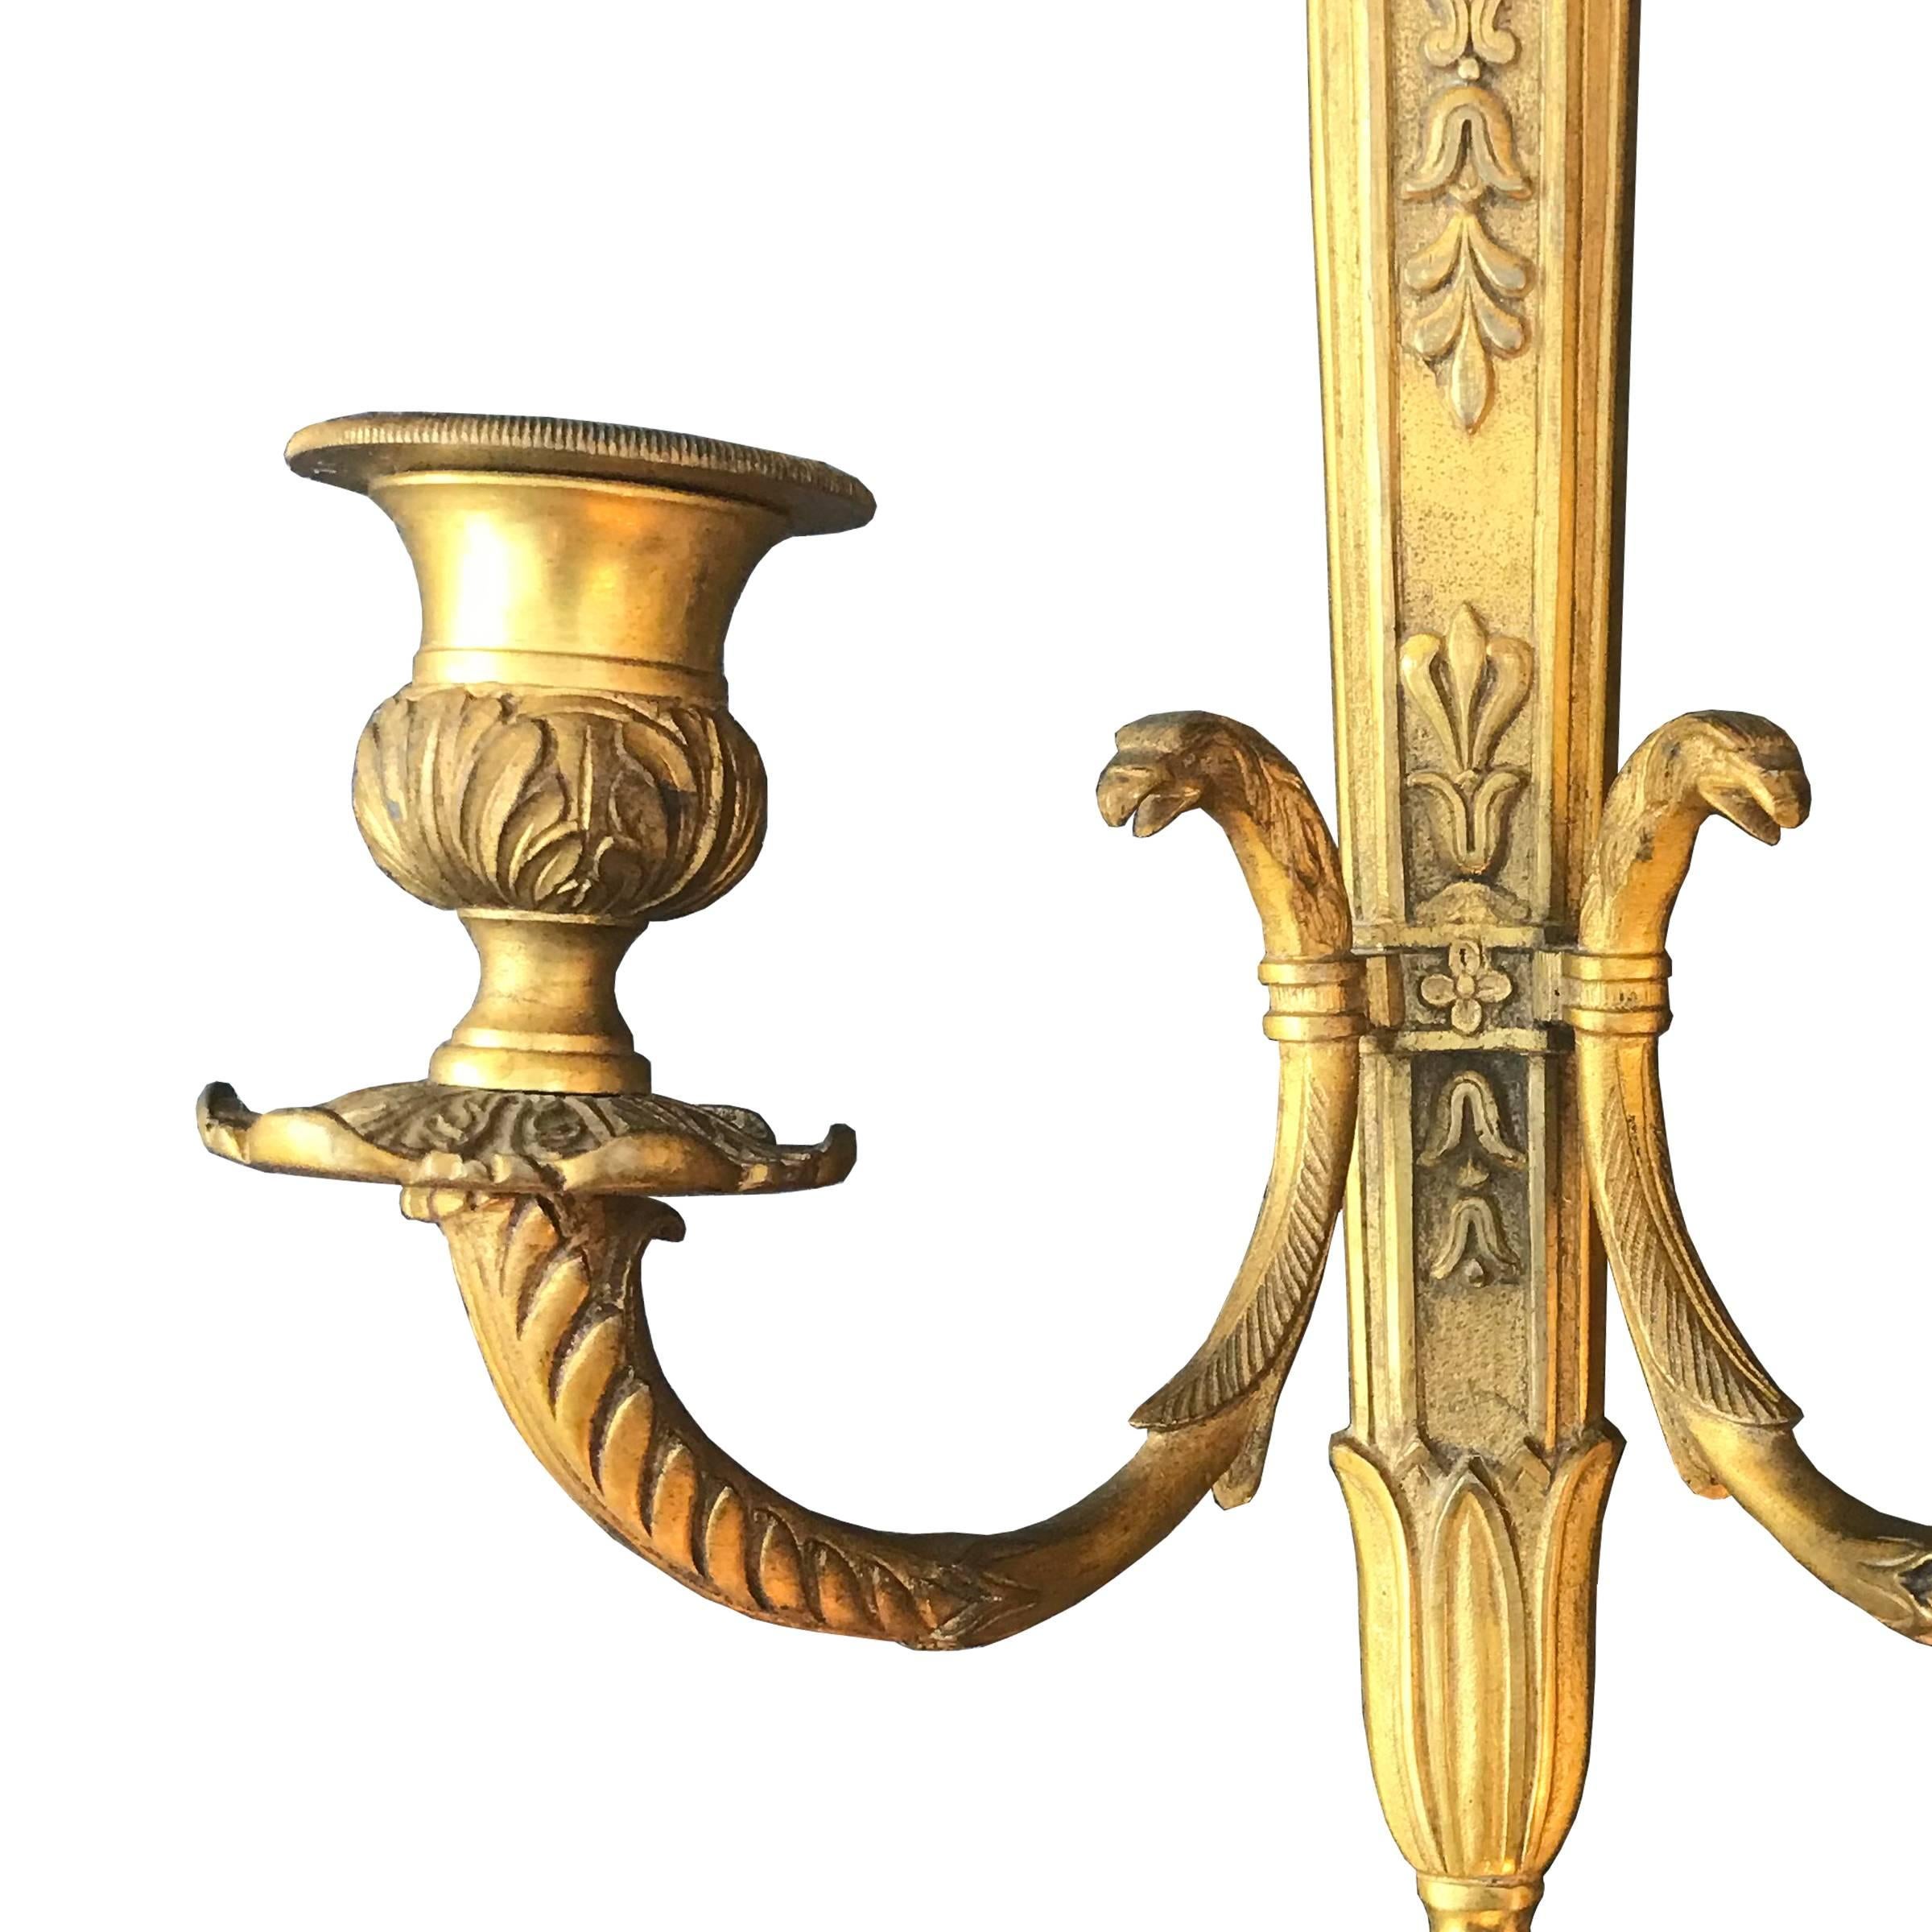 Gilt Pair of French Second Empire Candle Sconces